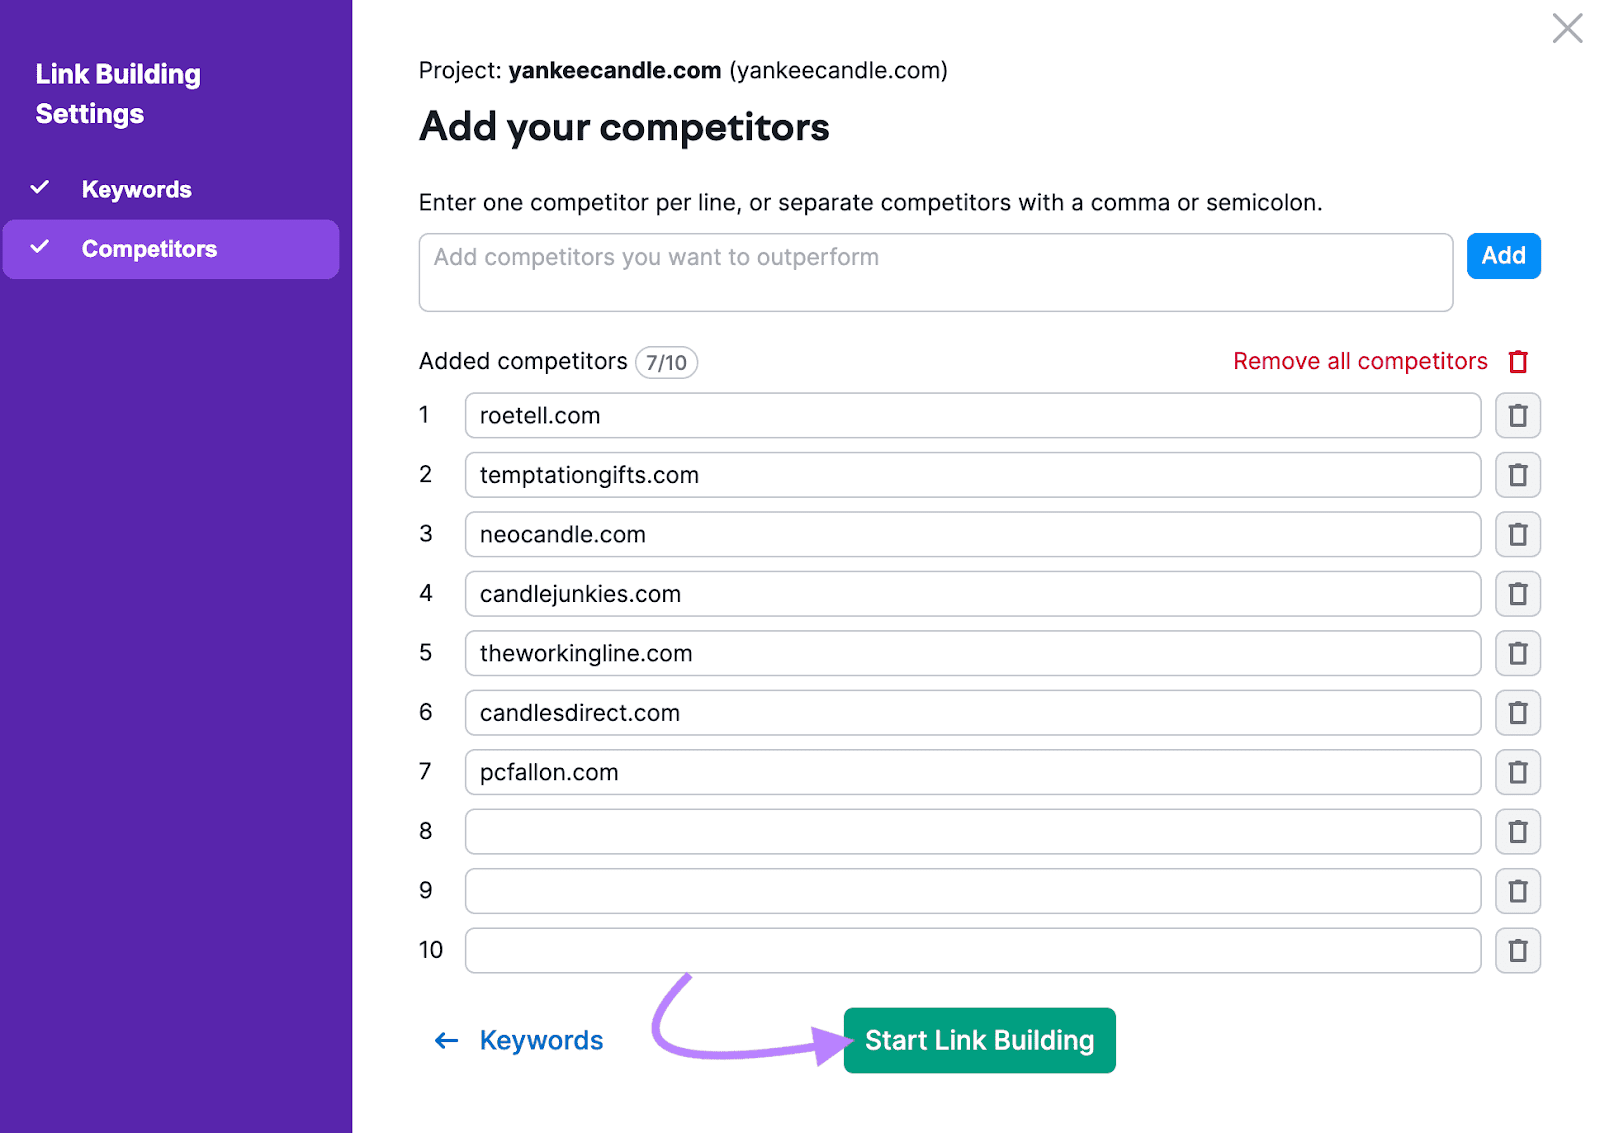 “Start Link Building” button selected at the bottom of "Add your competitors" window